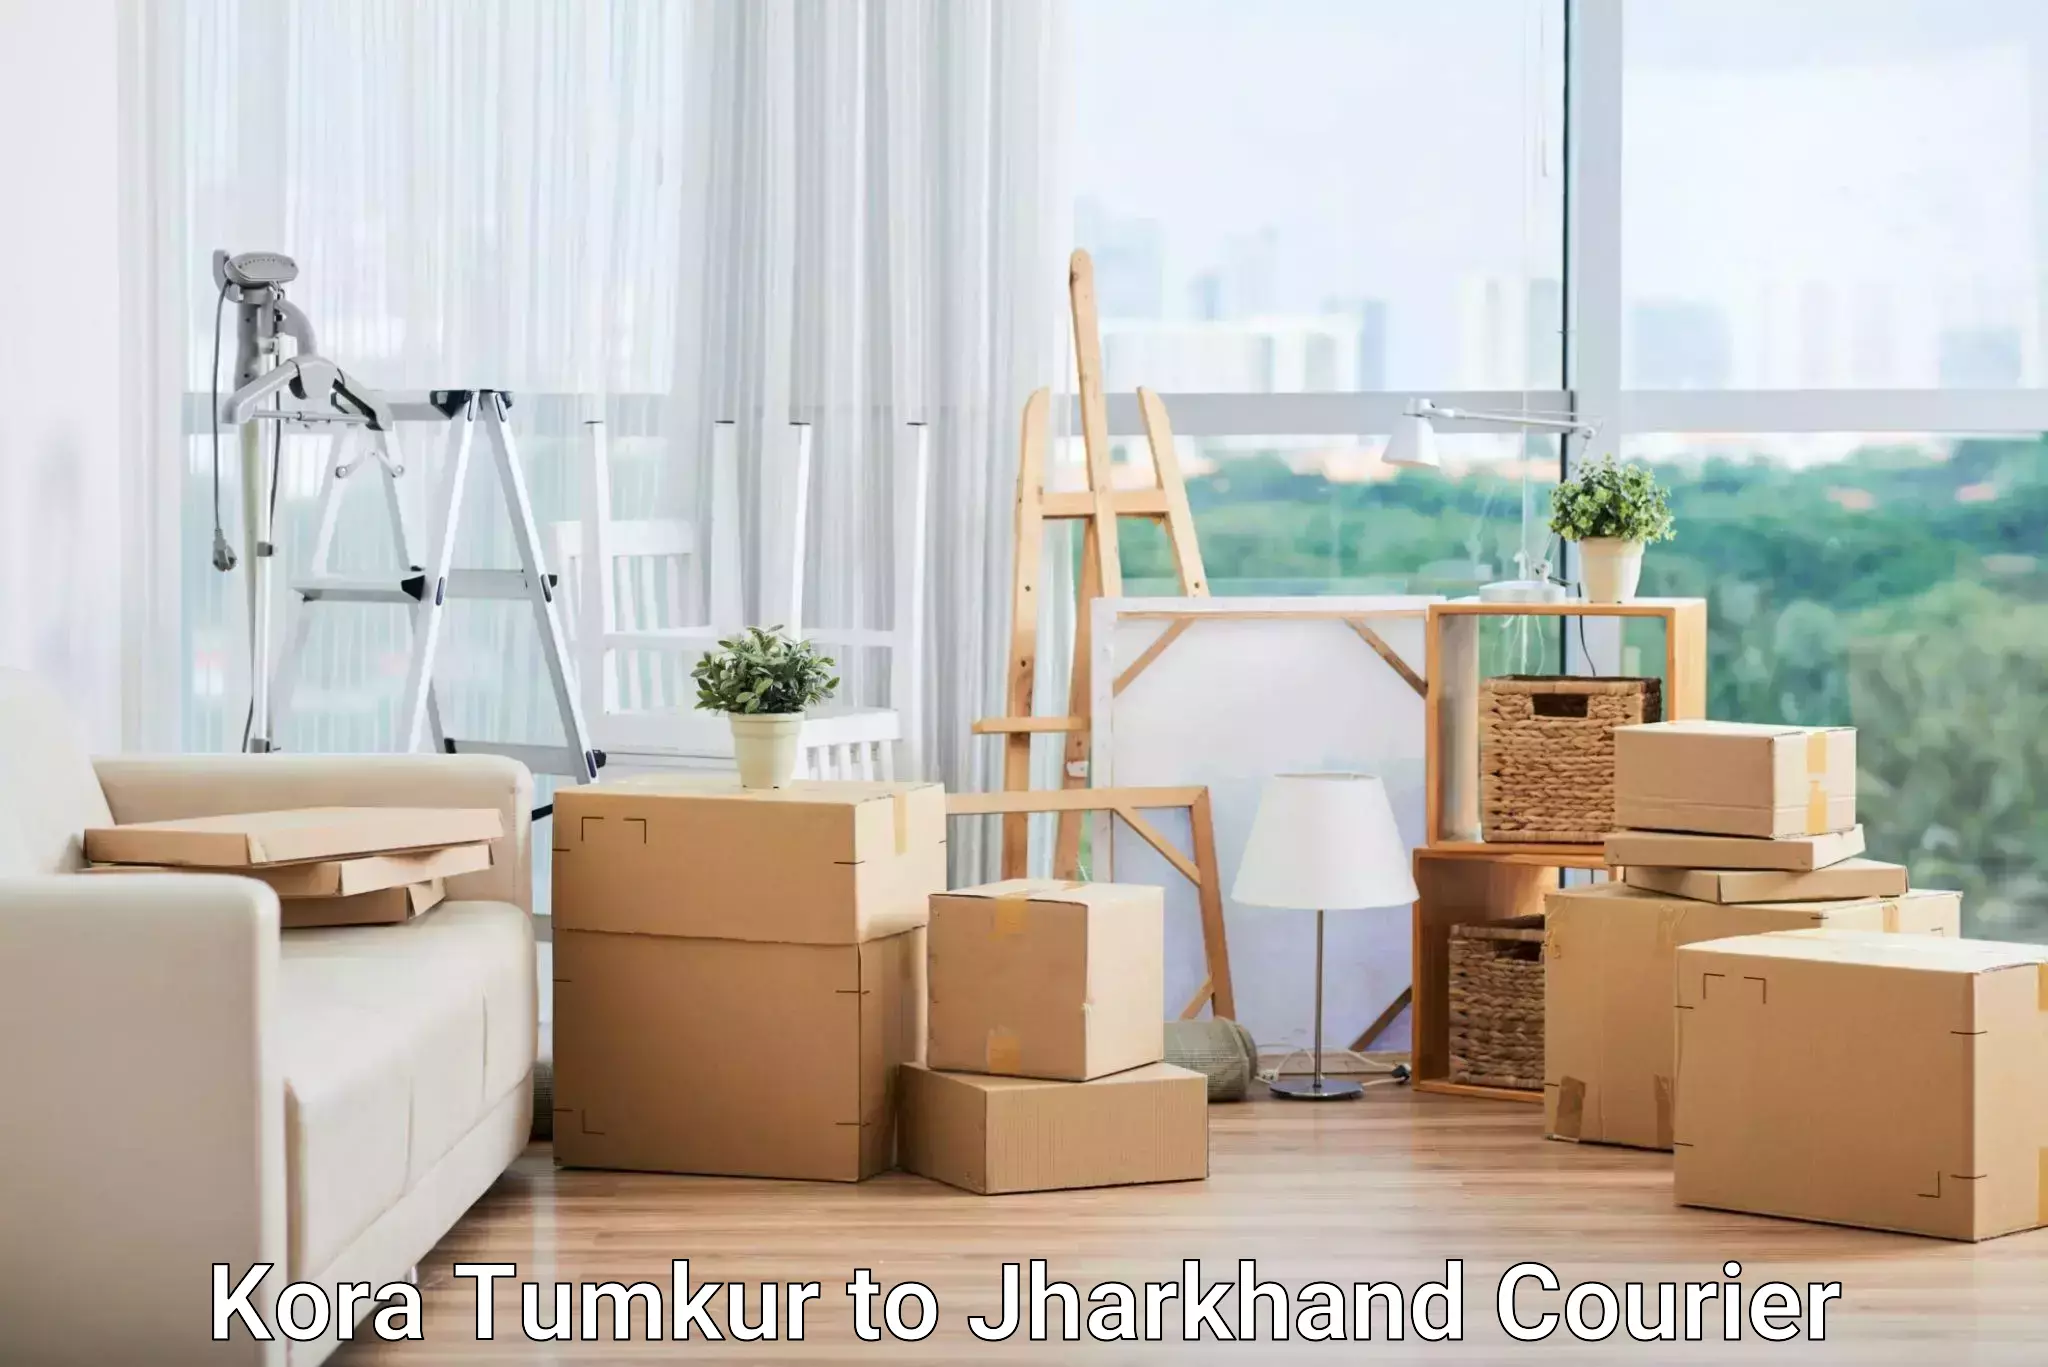 Courier service efficiency Kora Tumkur to Chandil